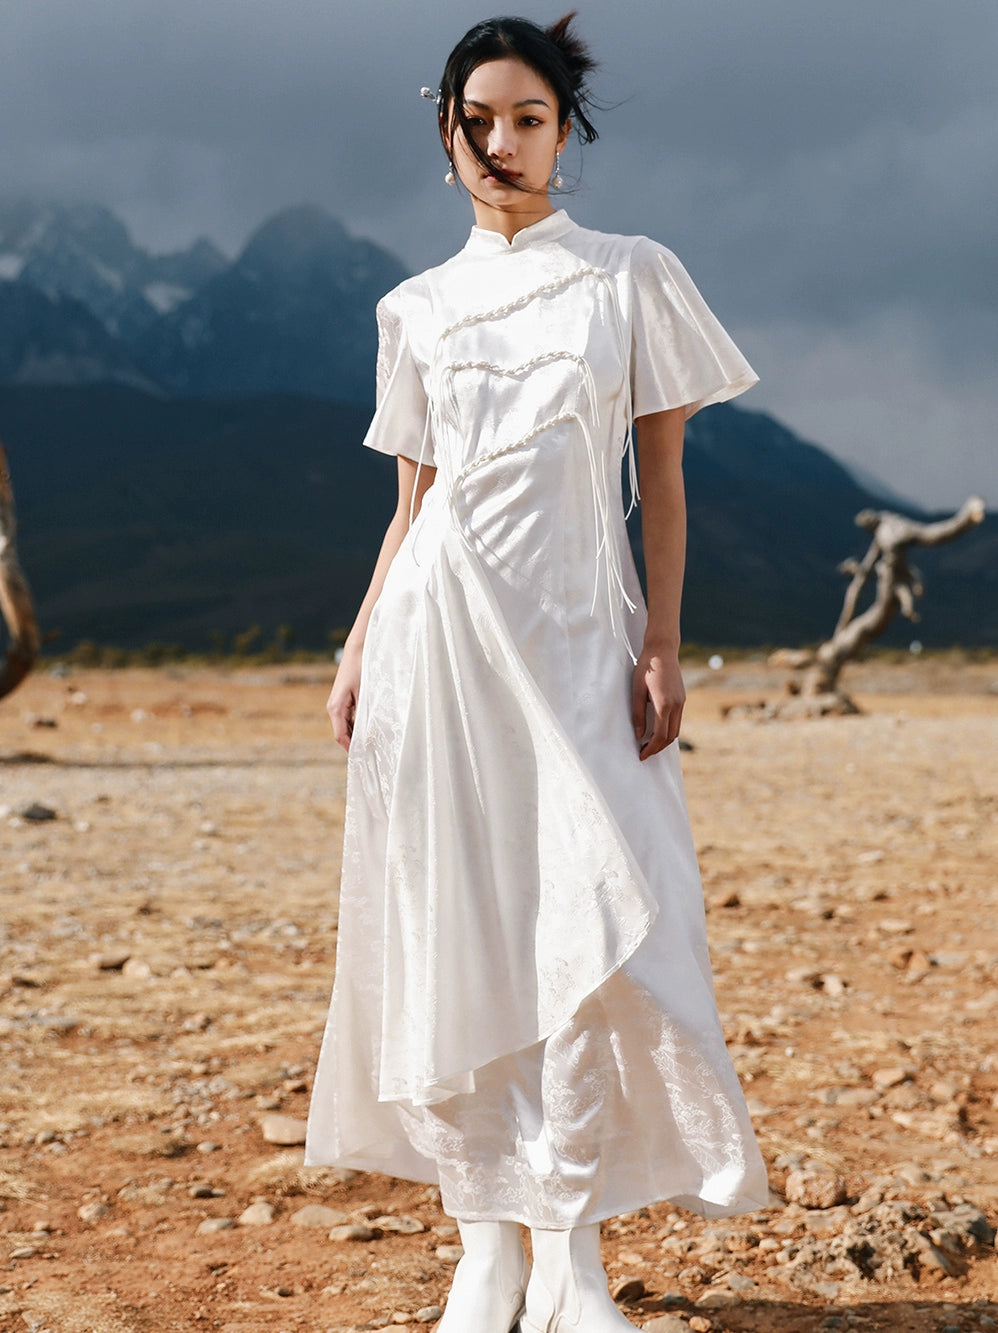 Shop our elegant white cheongsam collection, featuring a variety of styles including the classic white cheongsam wedding dress, sophisticated silk cheongsam, and stylish cheongsam mini dress. Perfect for brides and bridal parties, our wedding cheongsam and cheongsam bridal gowns embody traditional elegance with a modern twist